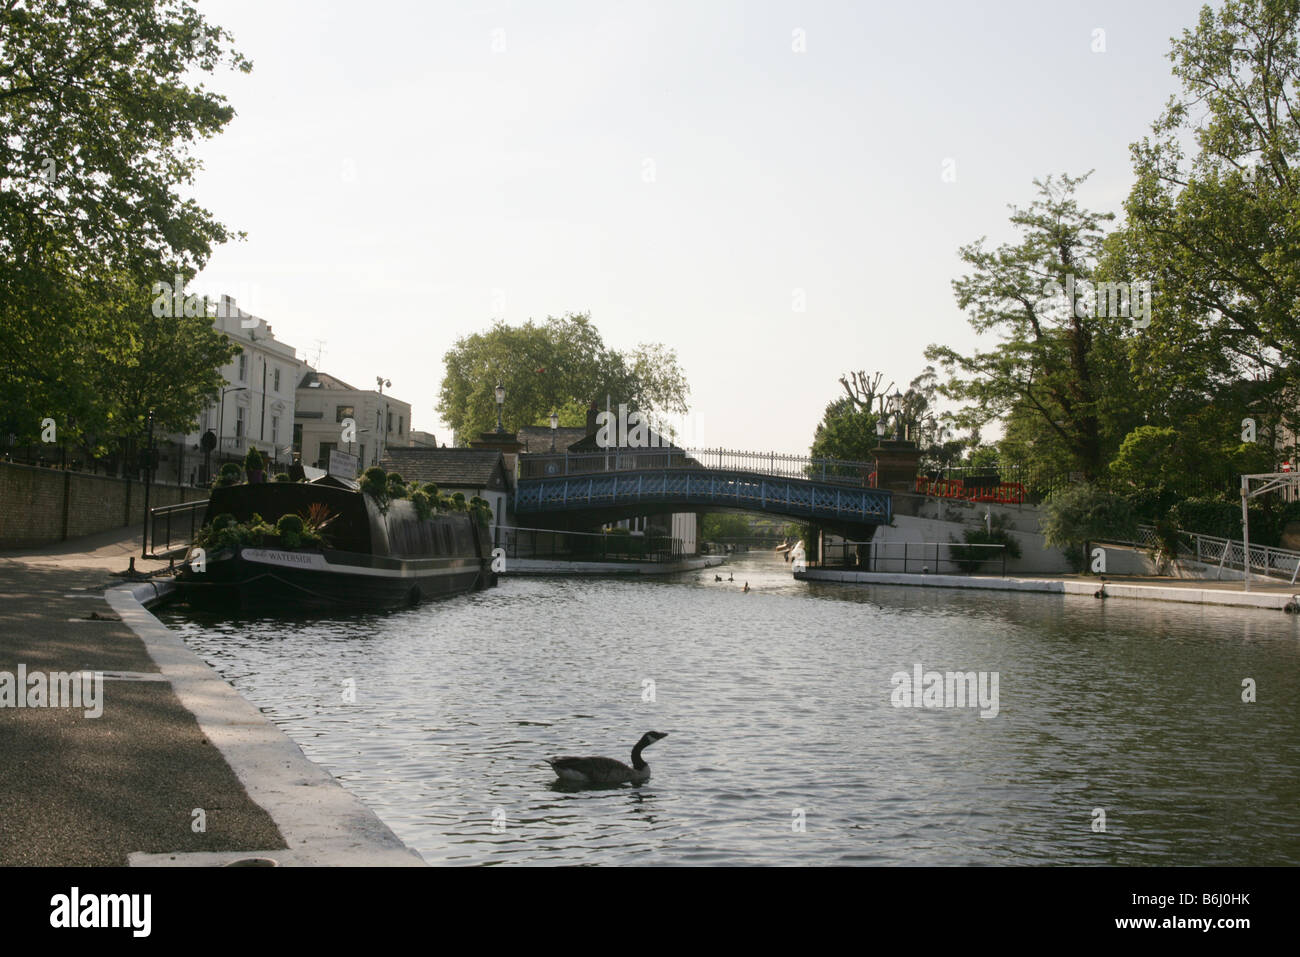 Canal in Little Venice, Maida Vale, London. Stock Photo